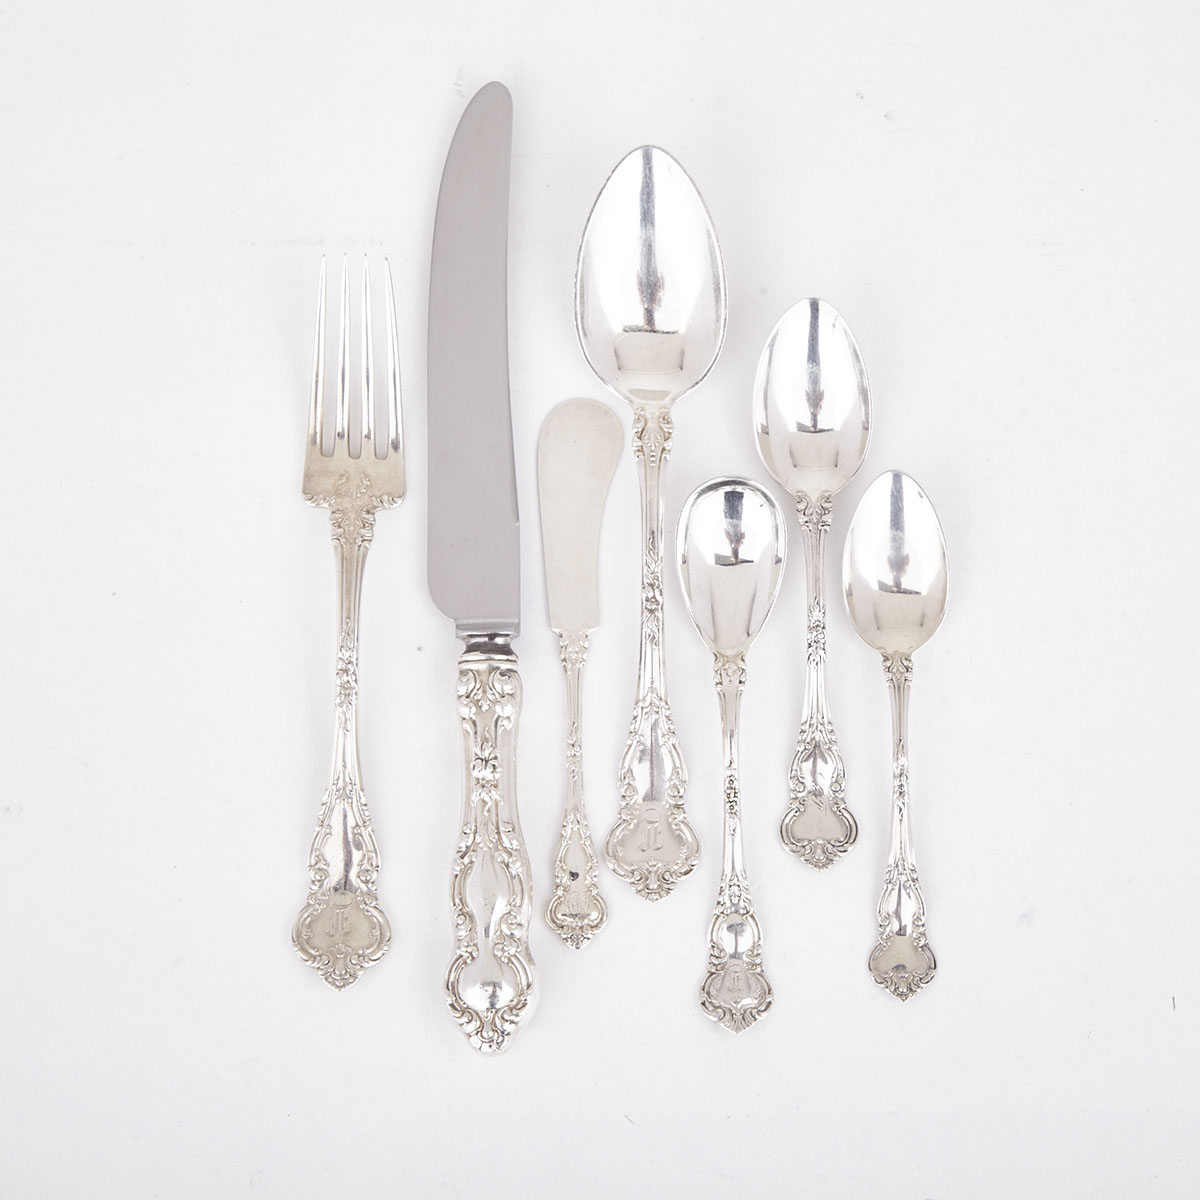 Canadian Silver Flatware, Roden Bros. for Ryrie Bros., Toronto, Ont., early 20th century